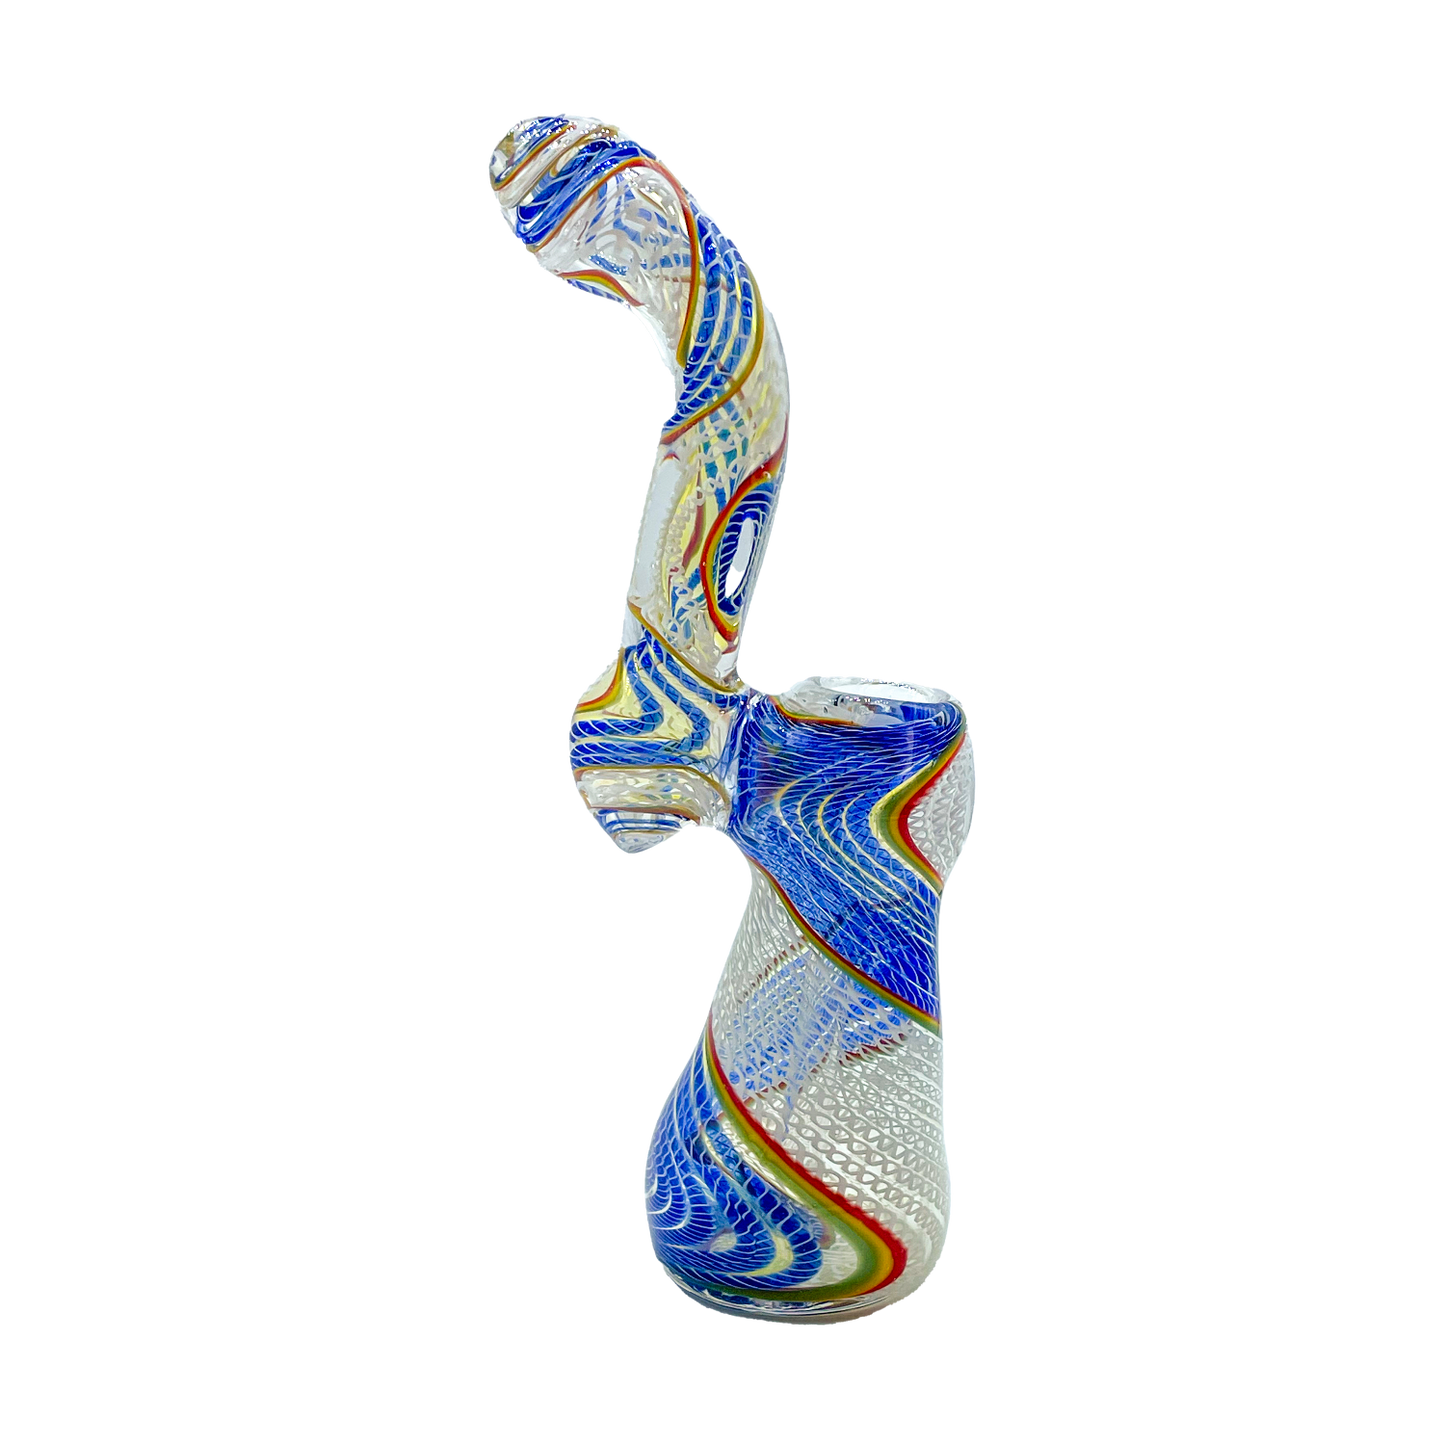 Babu - Large Standing Bubbler with Multi-Color Linework